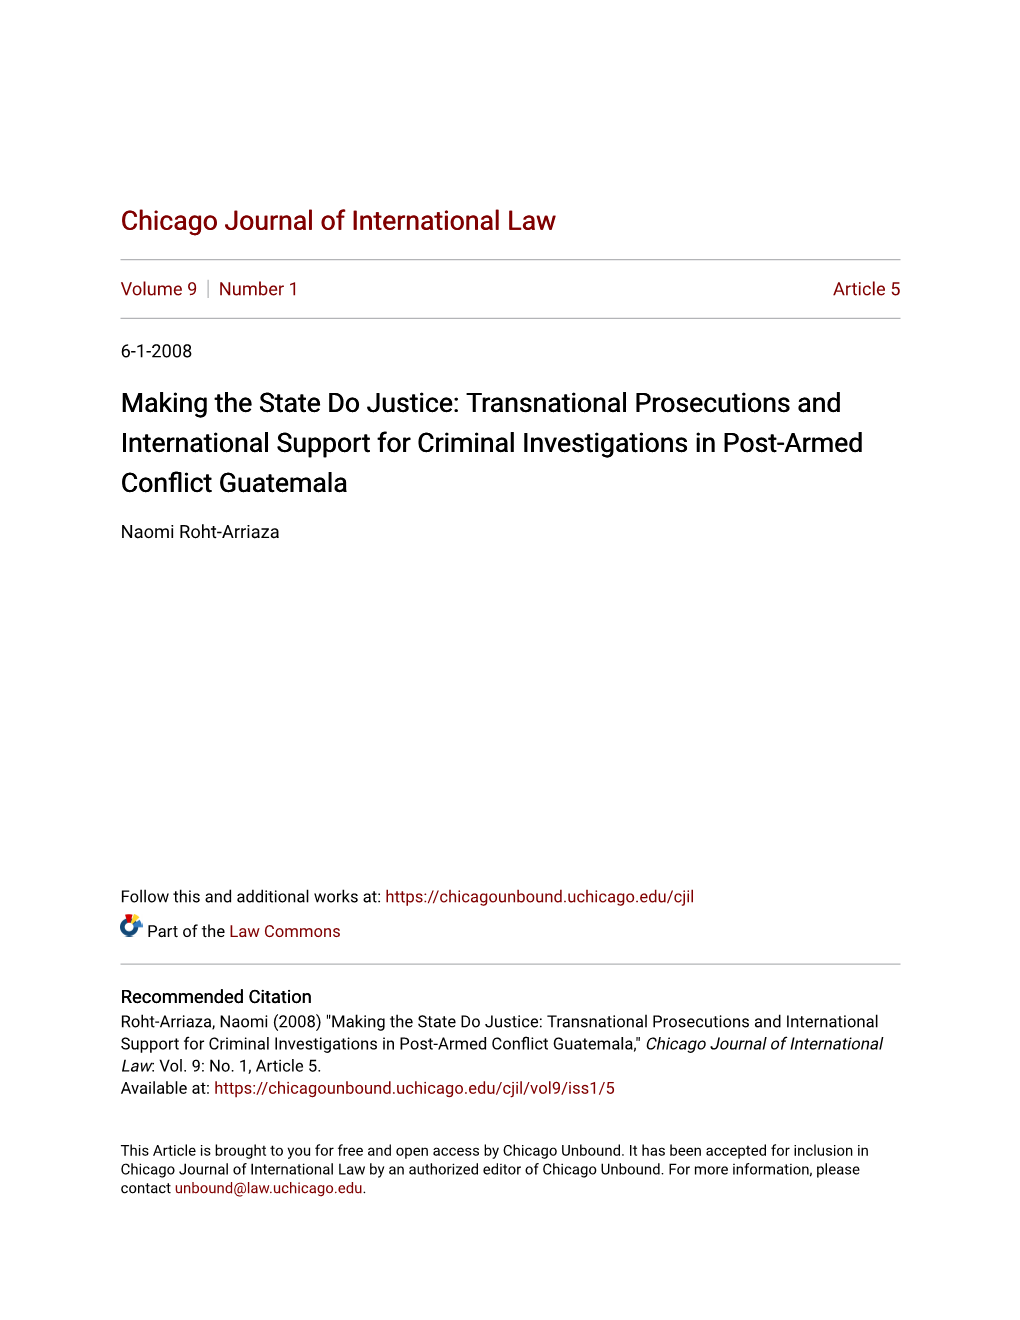 Transnational Prosecutions and International Support for Criminal Investigations in Post-Armed Conflict Guatemala